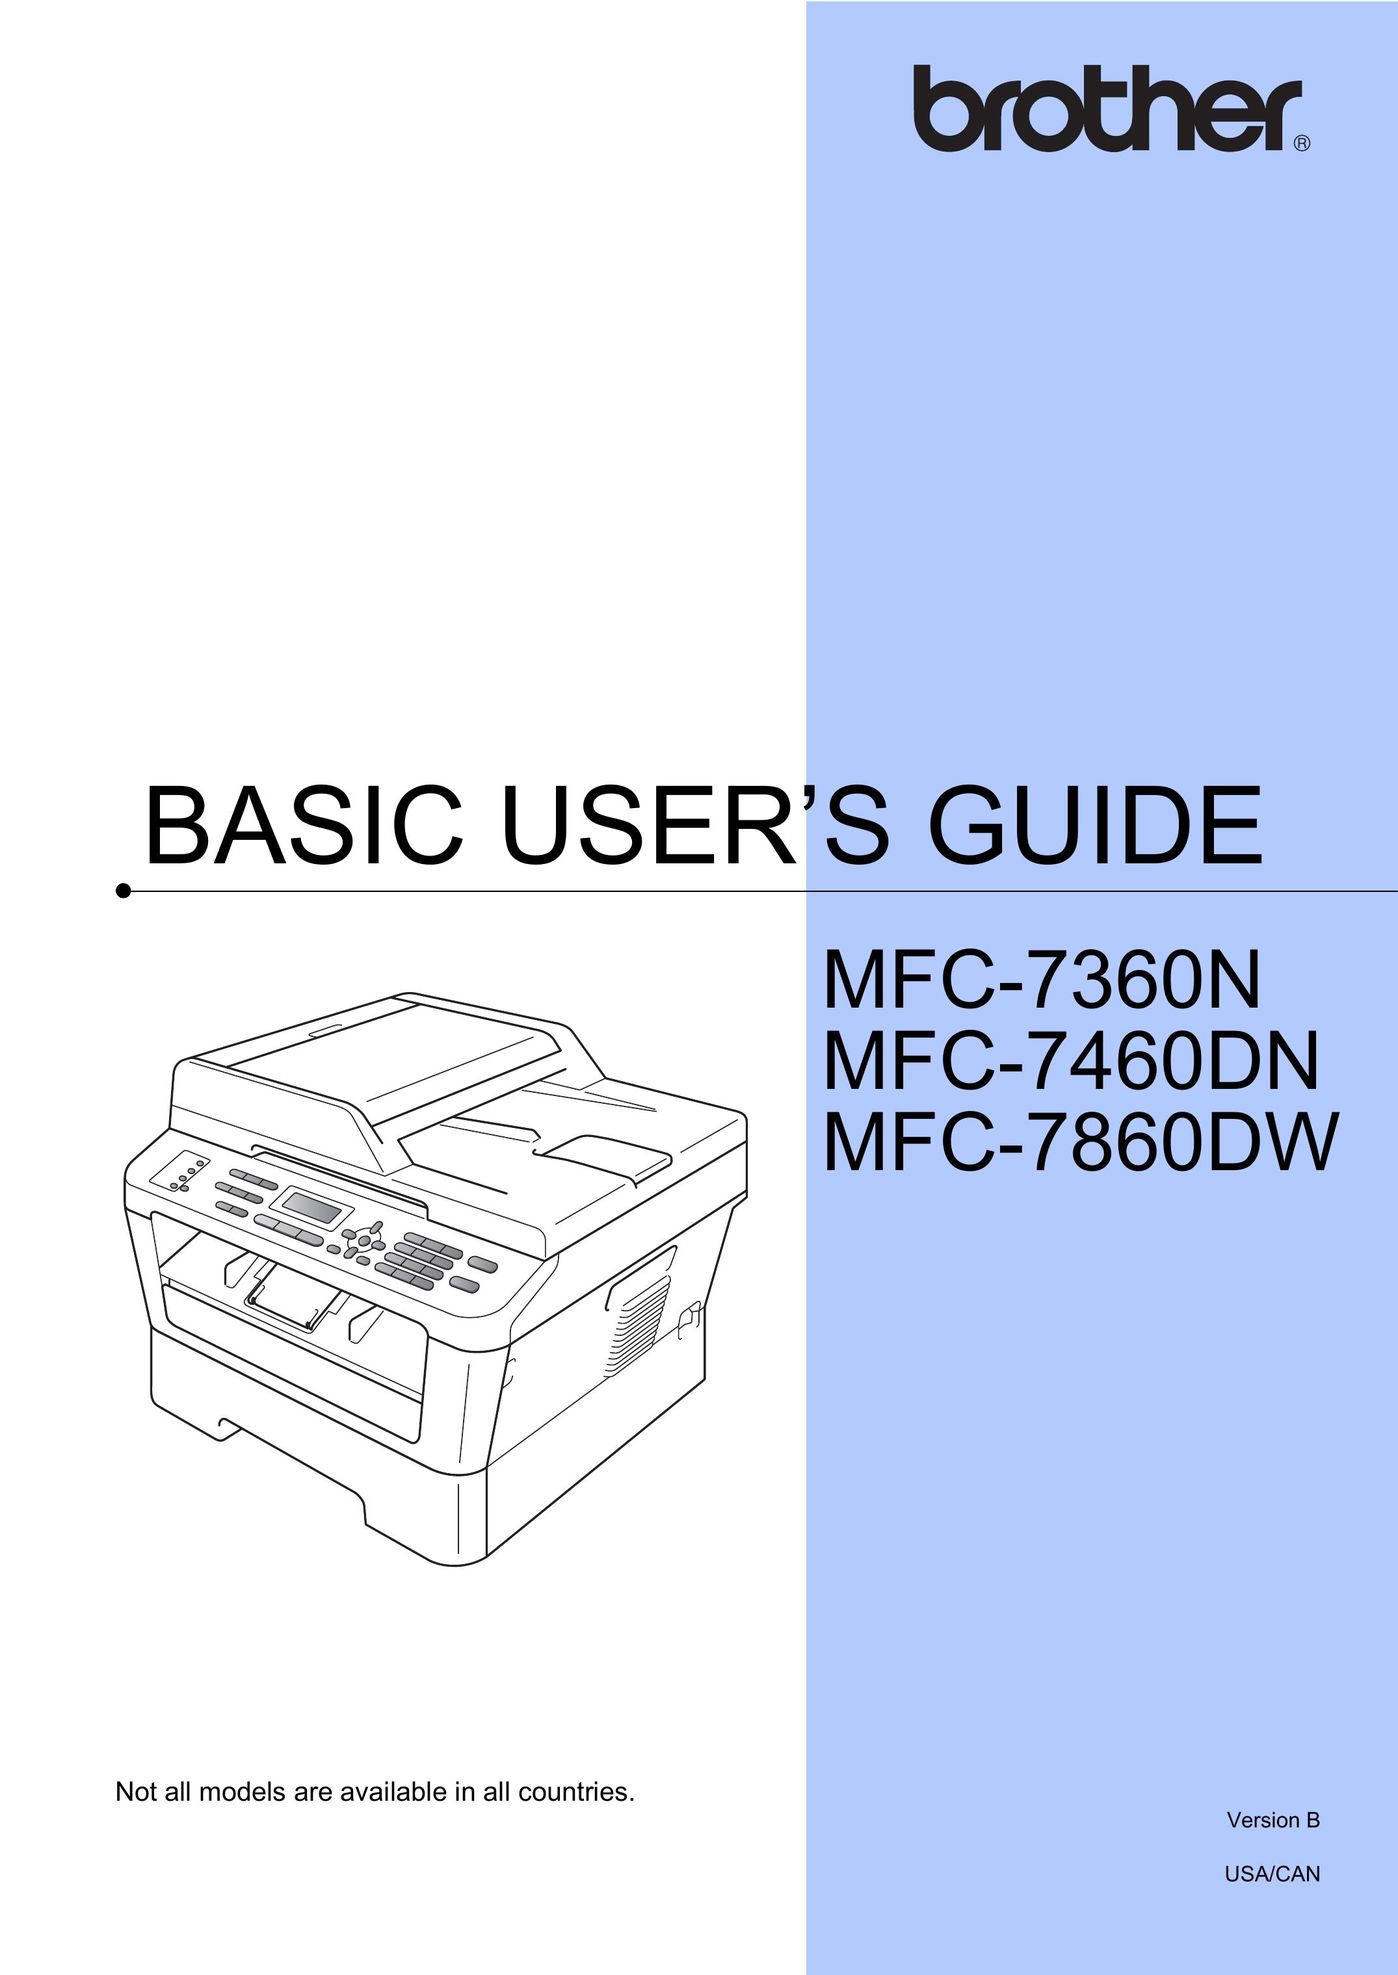 Brother 7360N All in One Printer User Manual (Page 1)